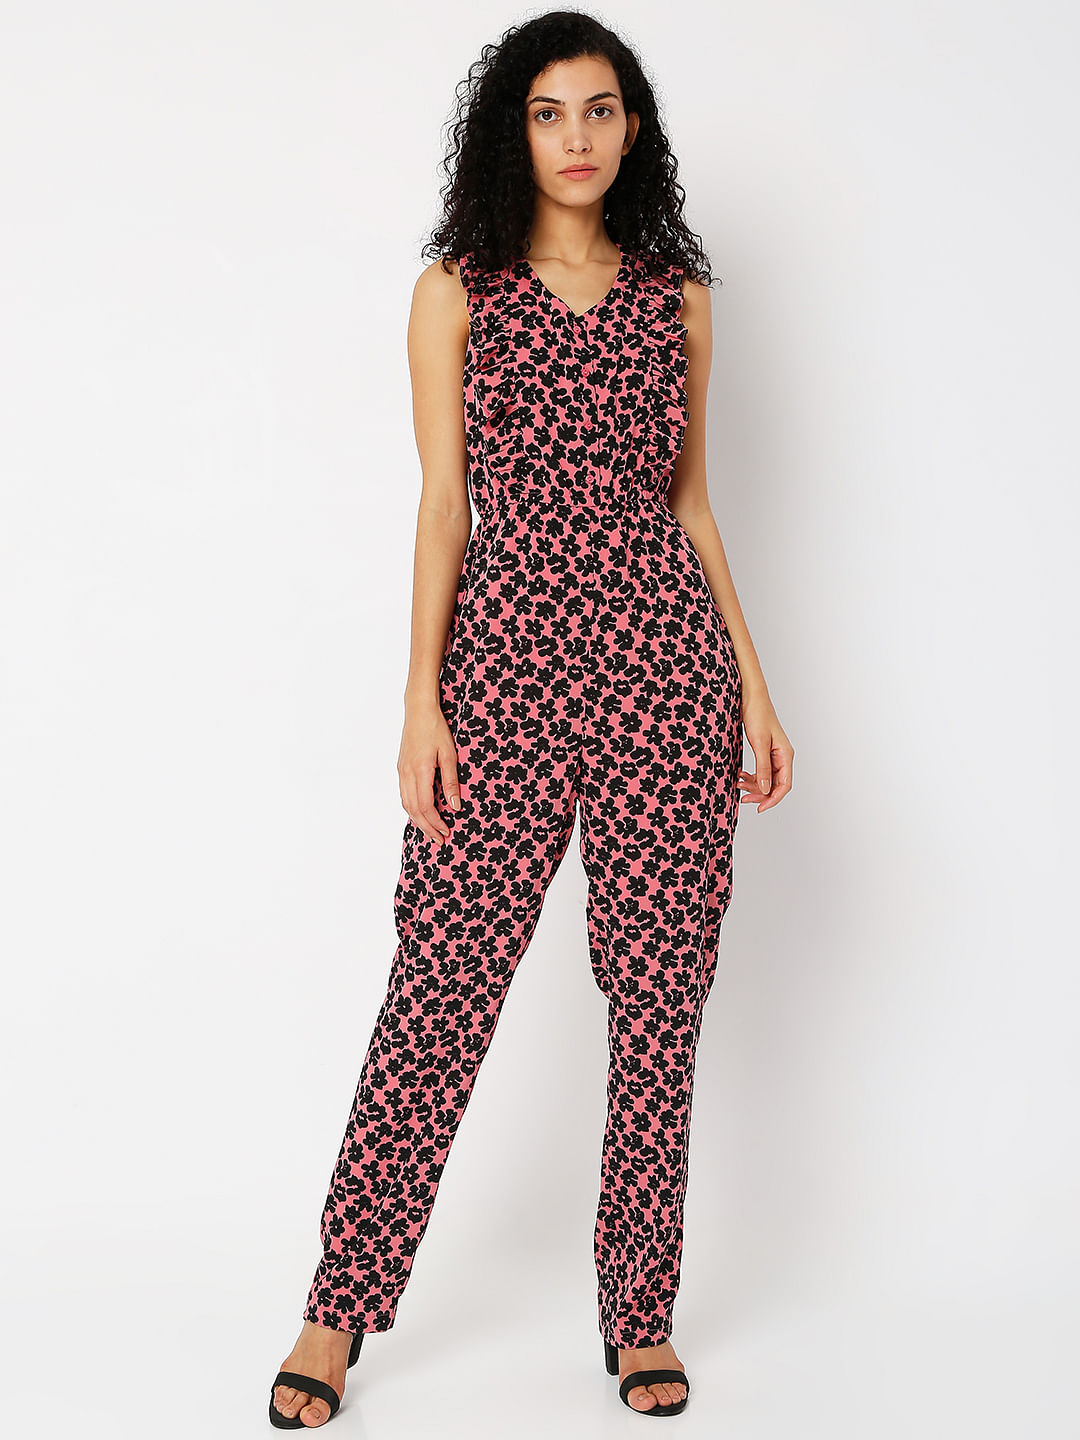 Vero Moda Women Jumpsuits and Playsuits In International online - Namshi